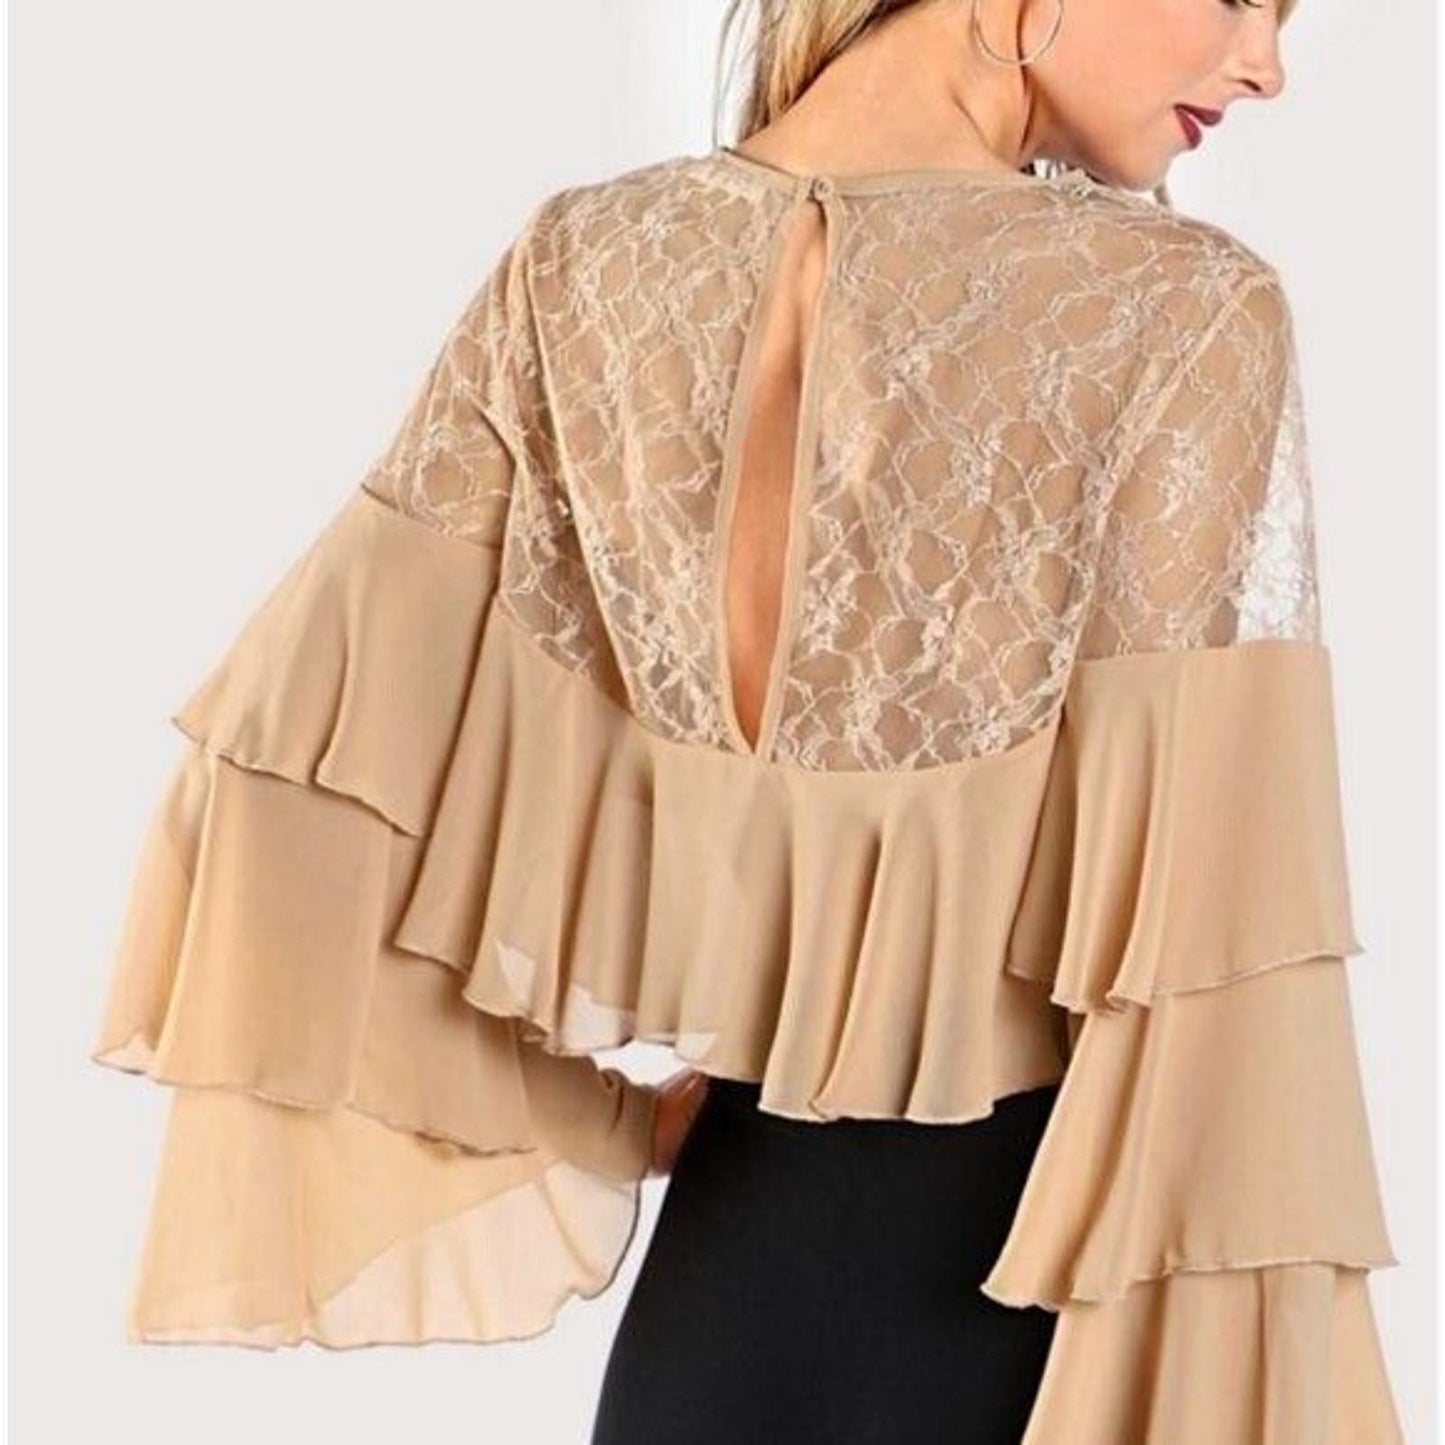 Essue sz M & L Fairytale lace ruffle cropped sheer blouse